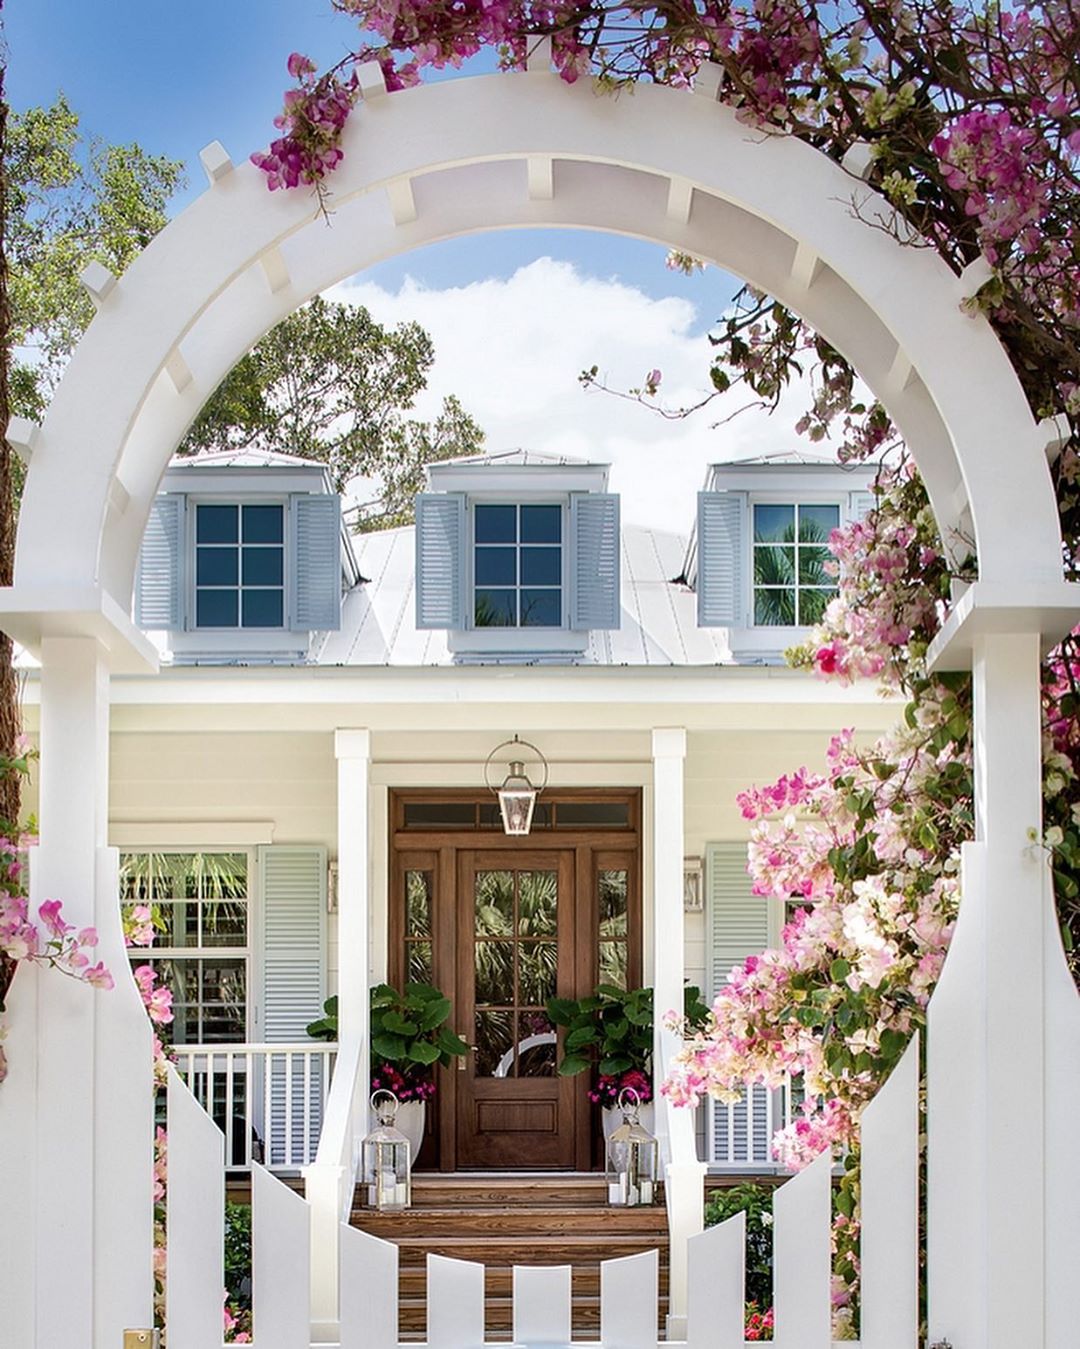 Breathtaking lovely curb appeal with amaazing floral covered arbor and blue shutters - Pineapples Design Group. Charming inspiration if you love white painted house exteriors! #whitehouses #housedesign #exteriors #curbappeal #shutters #arbor